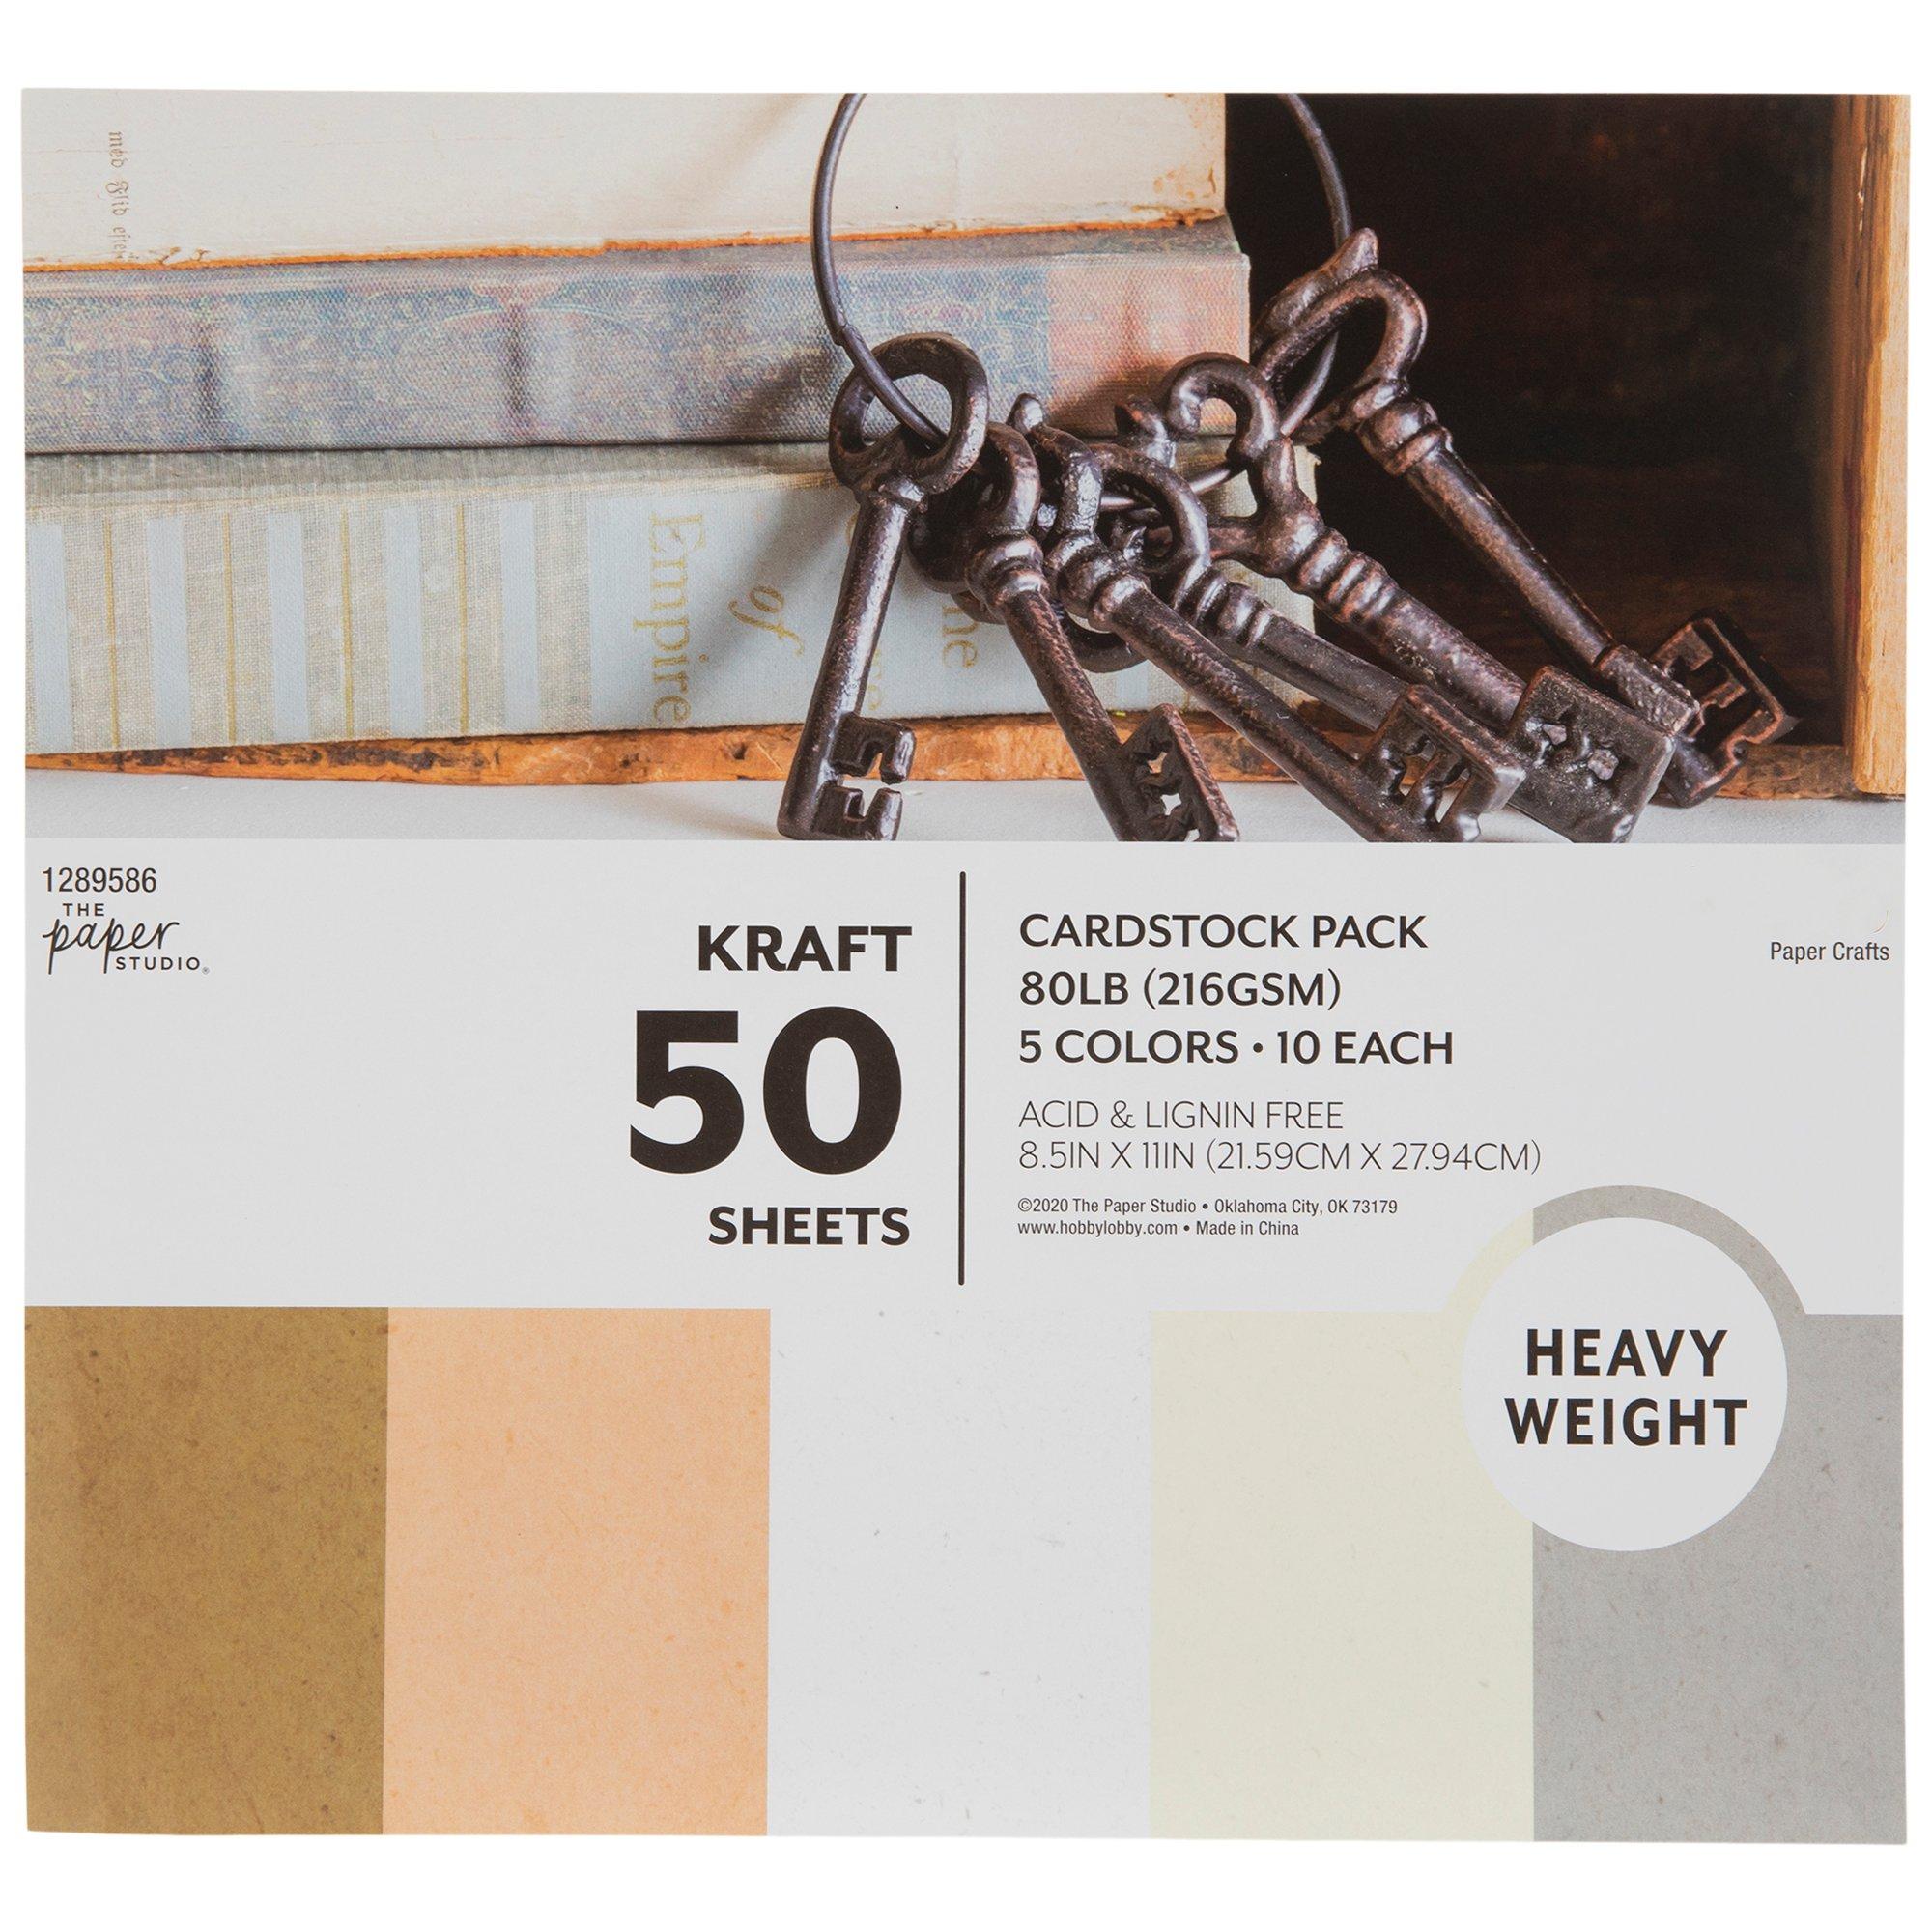 Textured Cardstock Paper Pack - 12 x 12, Hobby Lobby